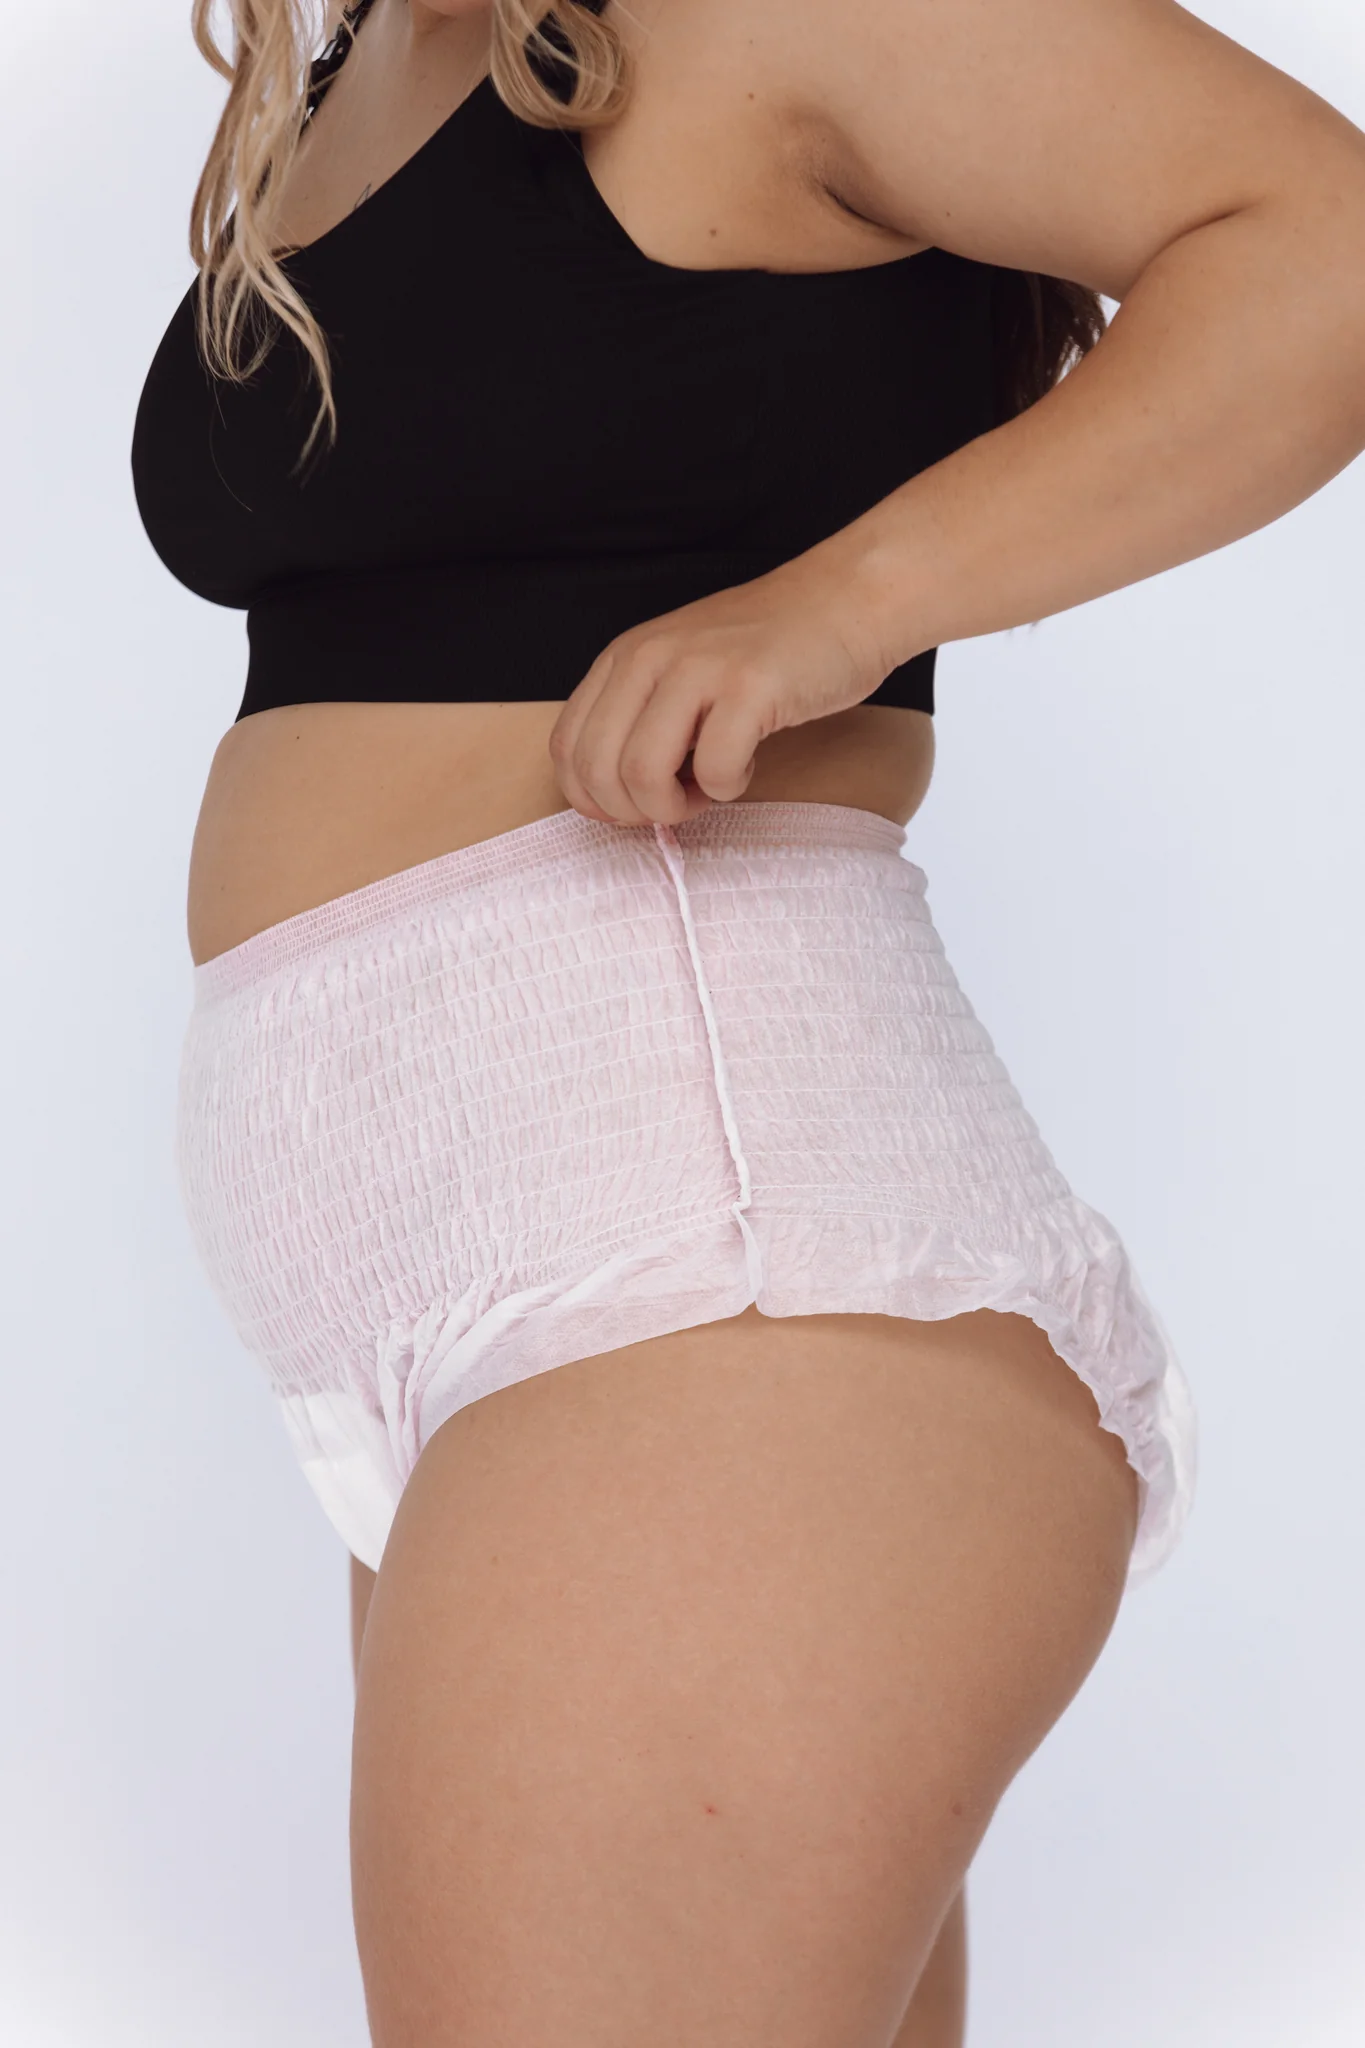 Partum Panties - Disposable postpartum underwear: high waisted, soft &  absorbent — Be Empowered - Birth and Parenting Classes with Midwife Stacey